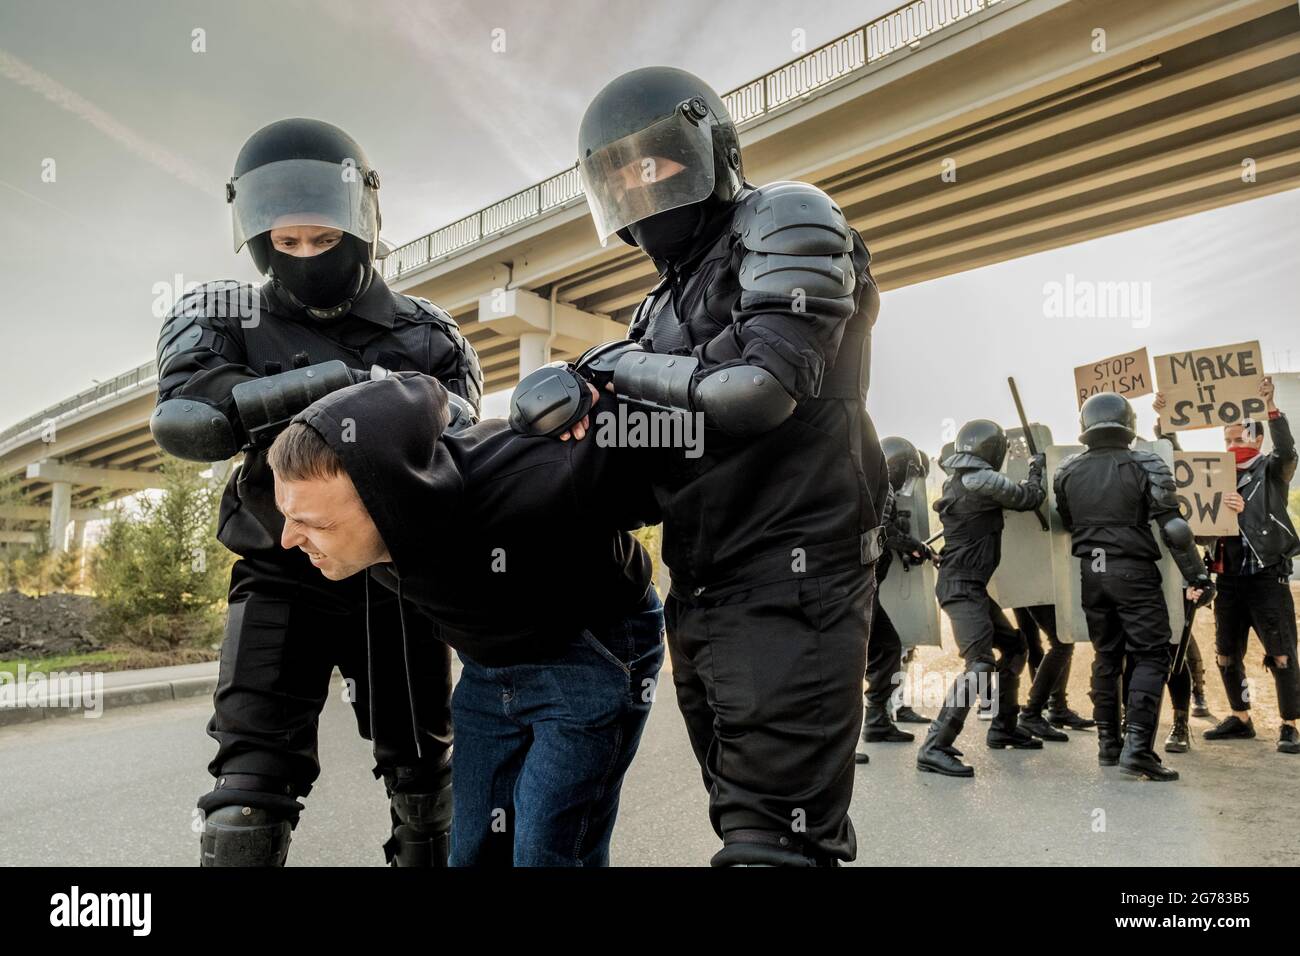 Riot police in body armors twisting man into uncomfortable position while confronting crowd in city Stock Photo